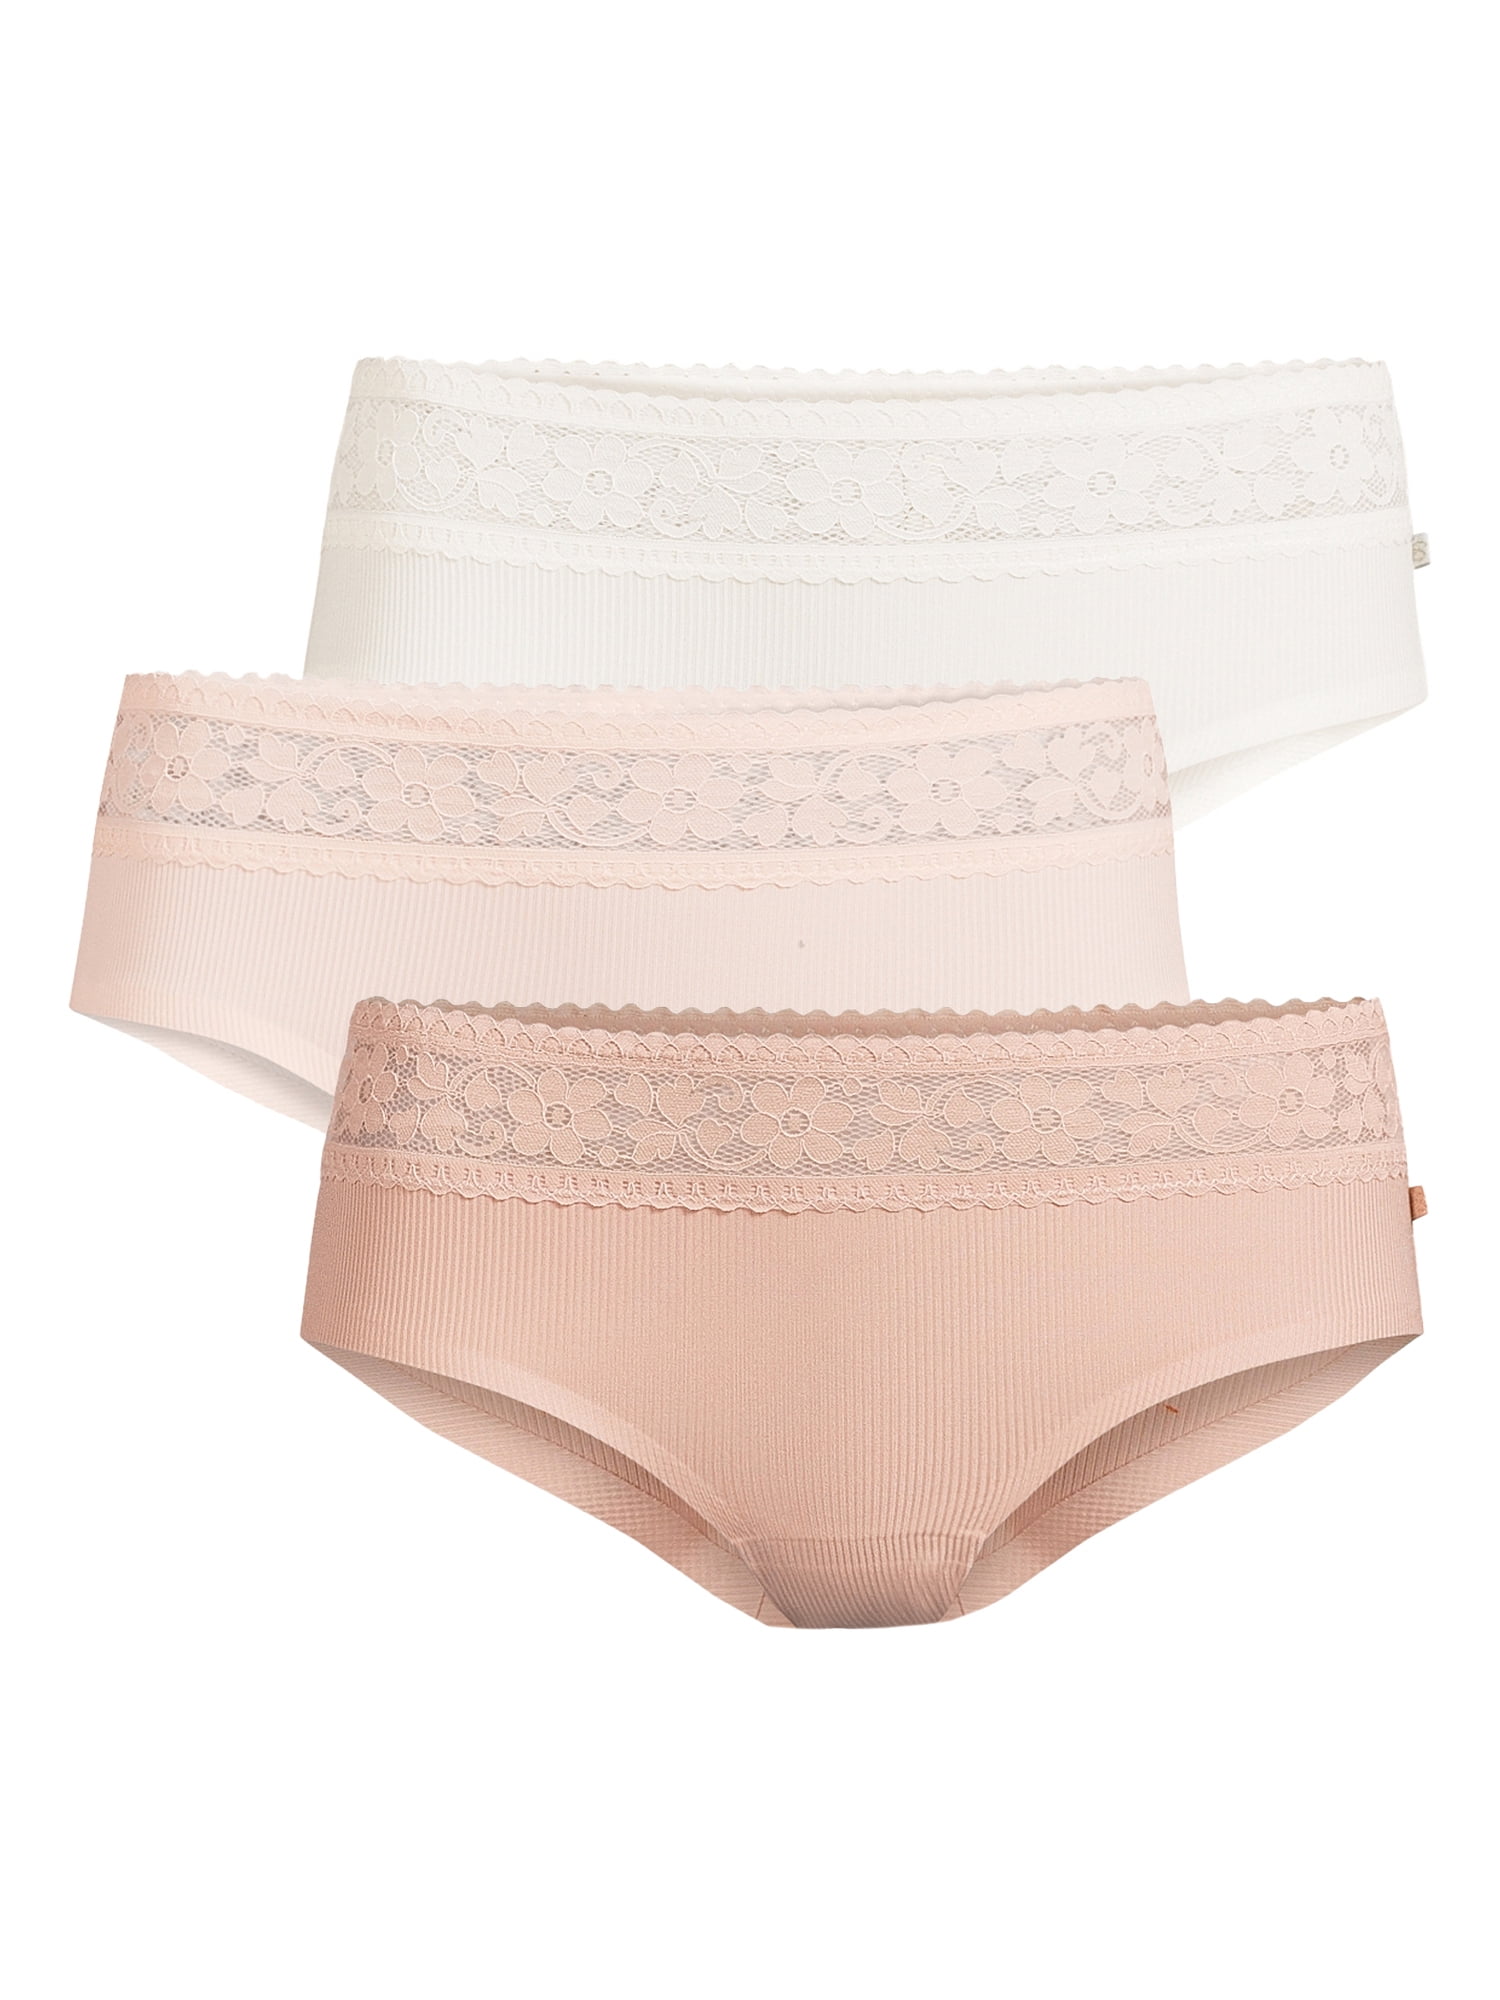 Jessica Simpson Women's Ribbed Micro and Lace Hipster Panties, 3-Pack 